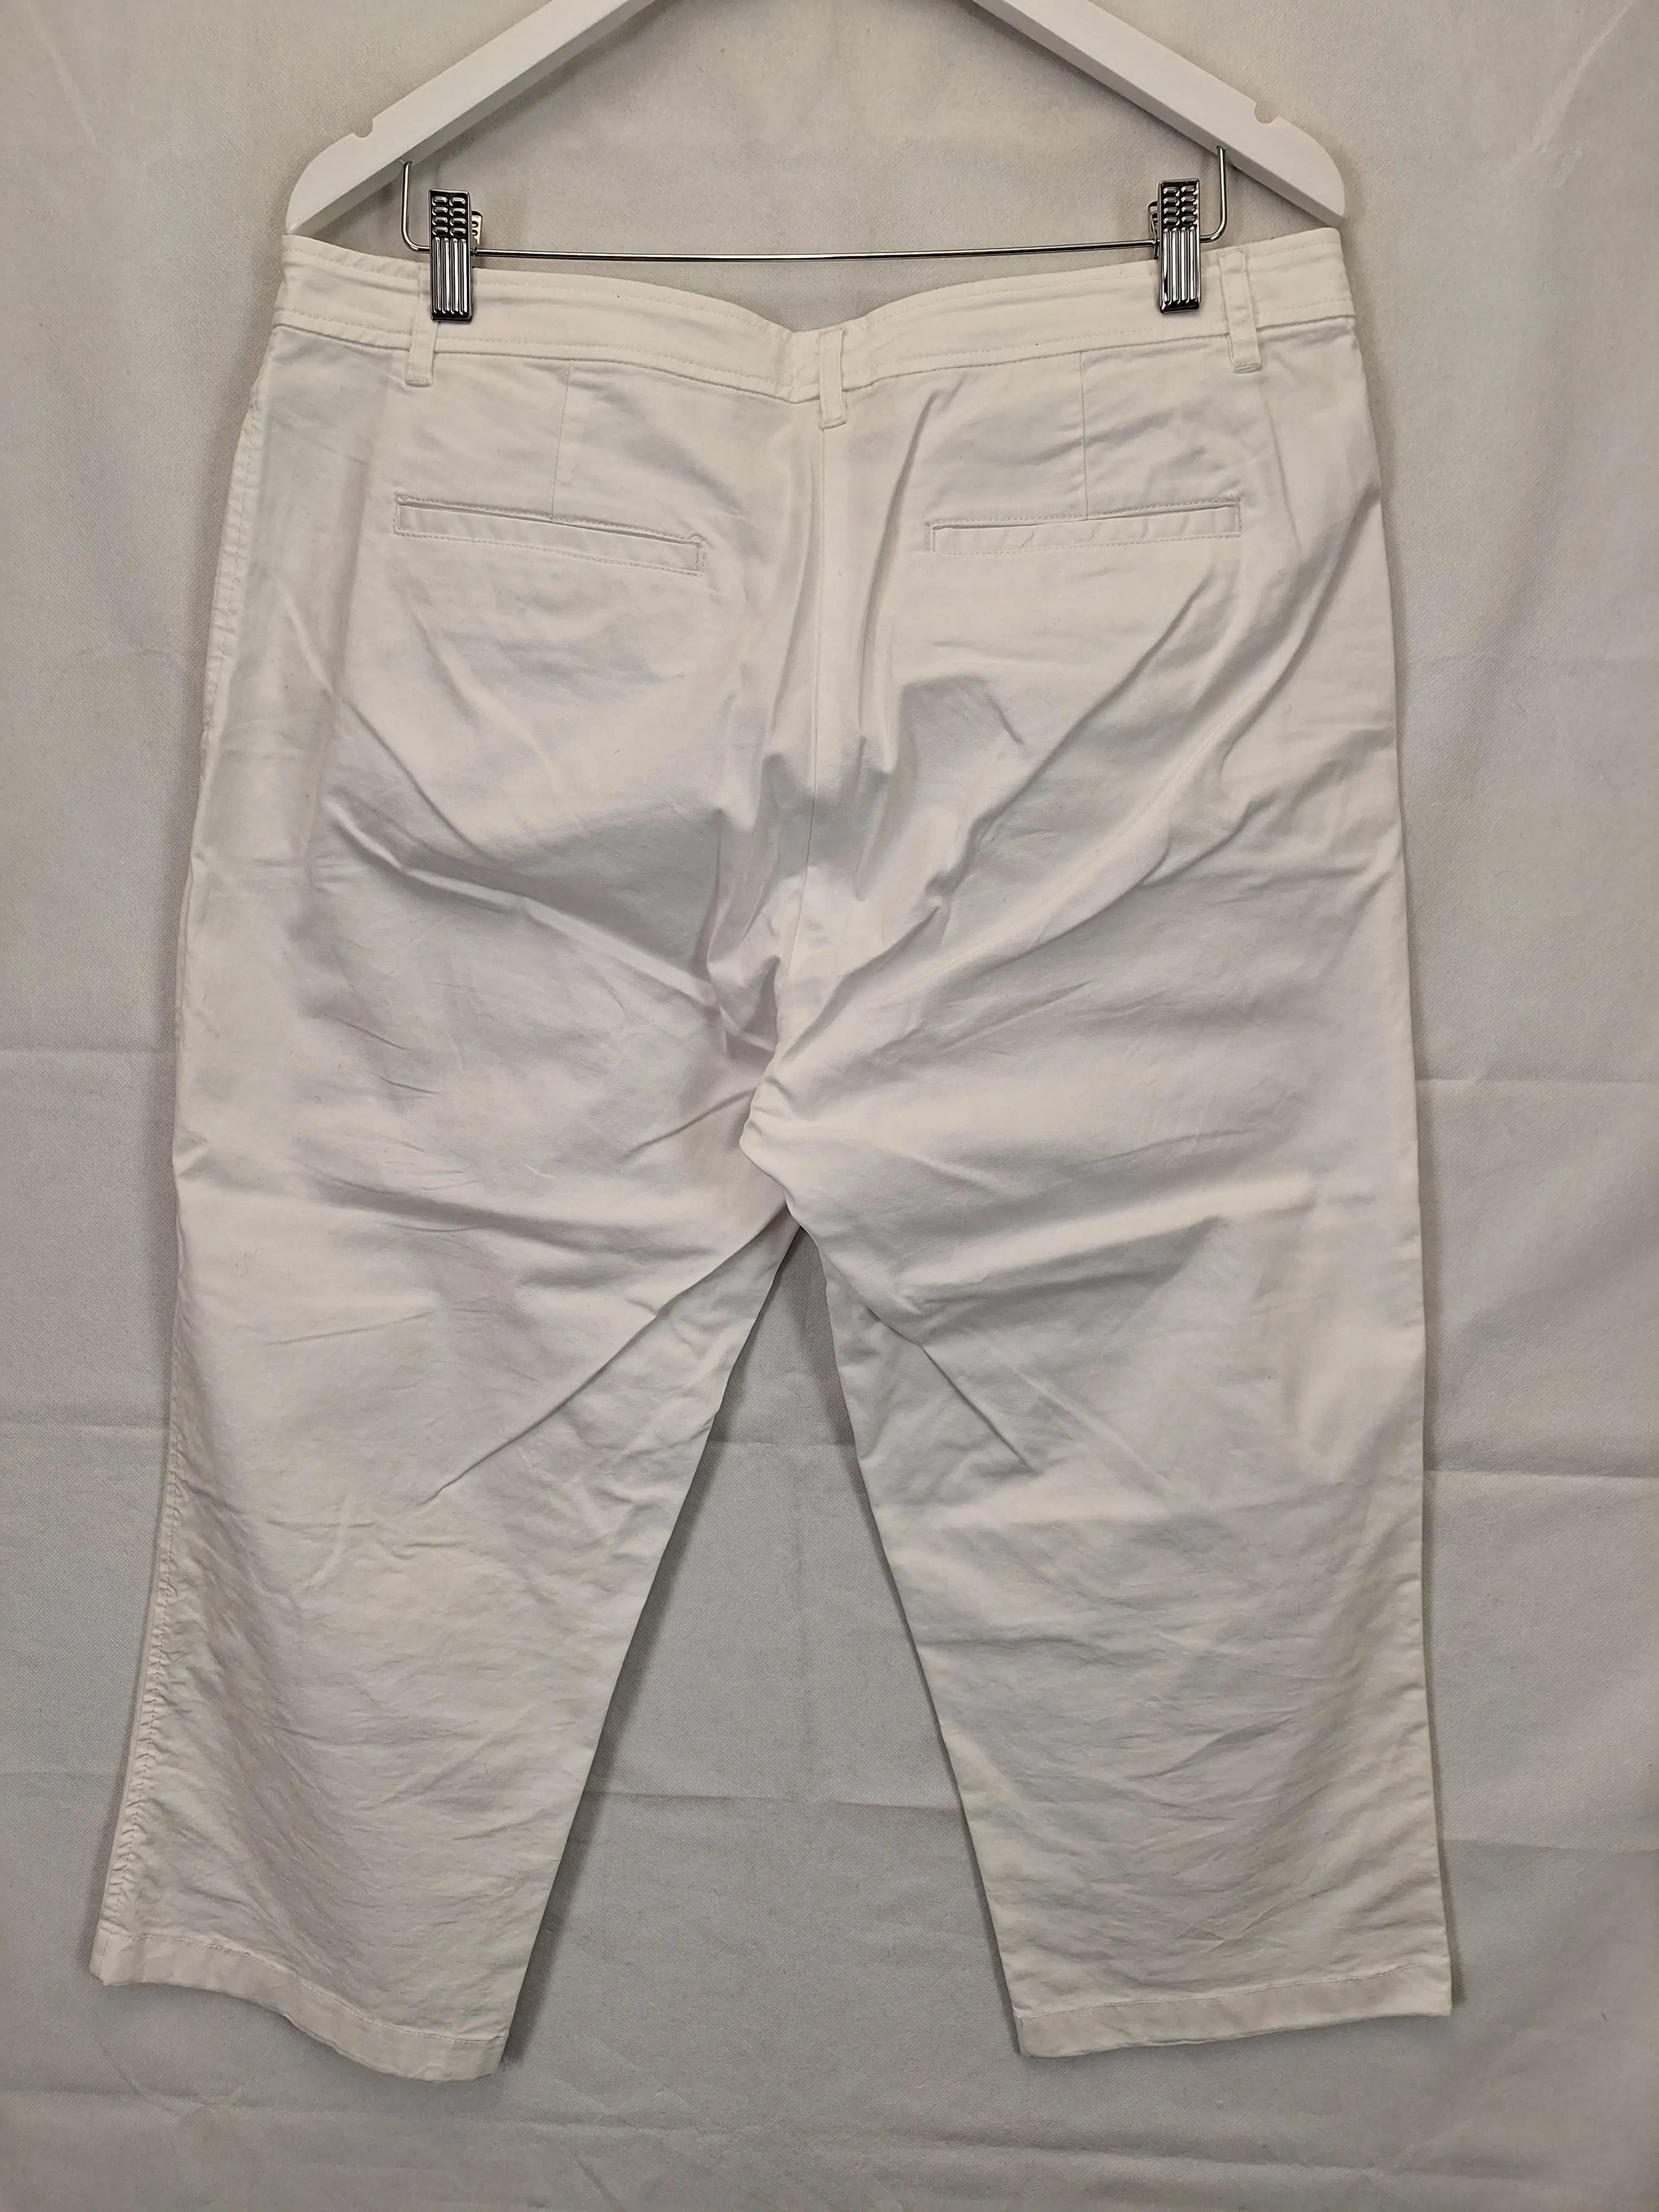 3 4 Cargo Pant - Buy 3 4 Cargo Pant online in India